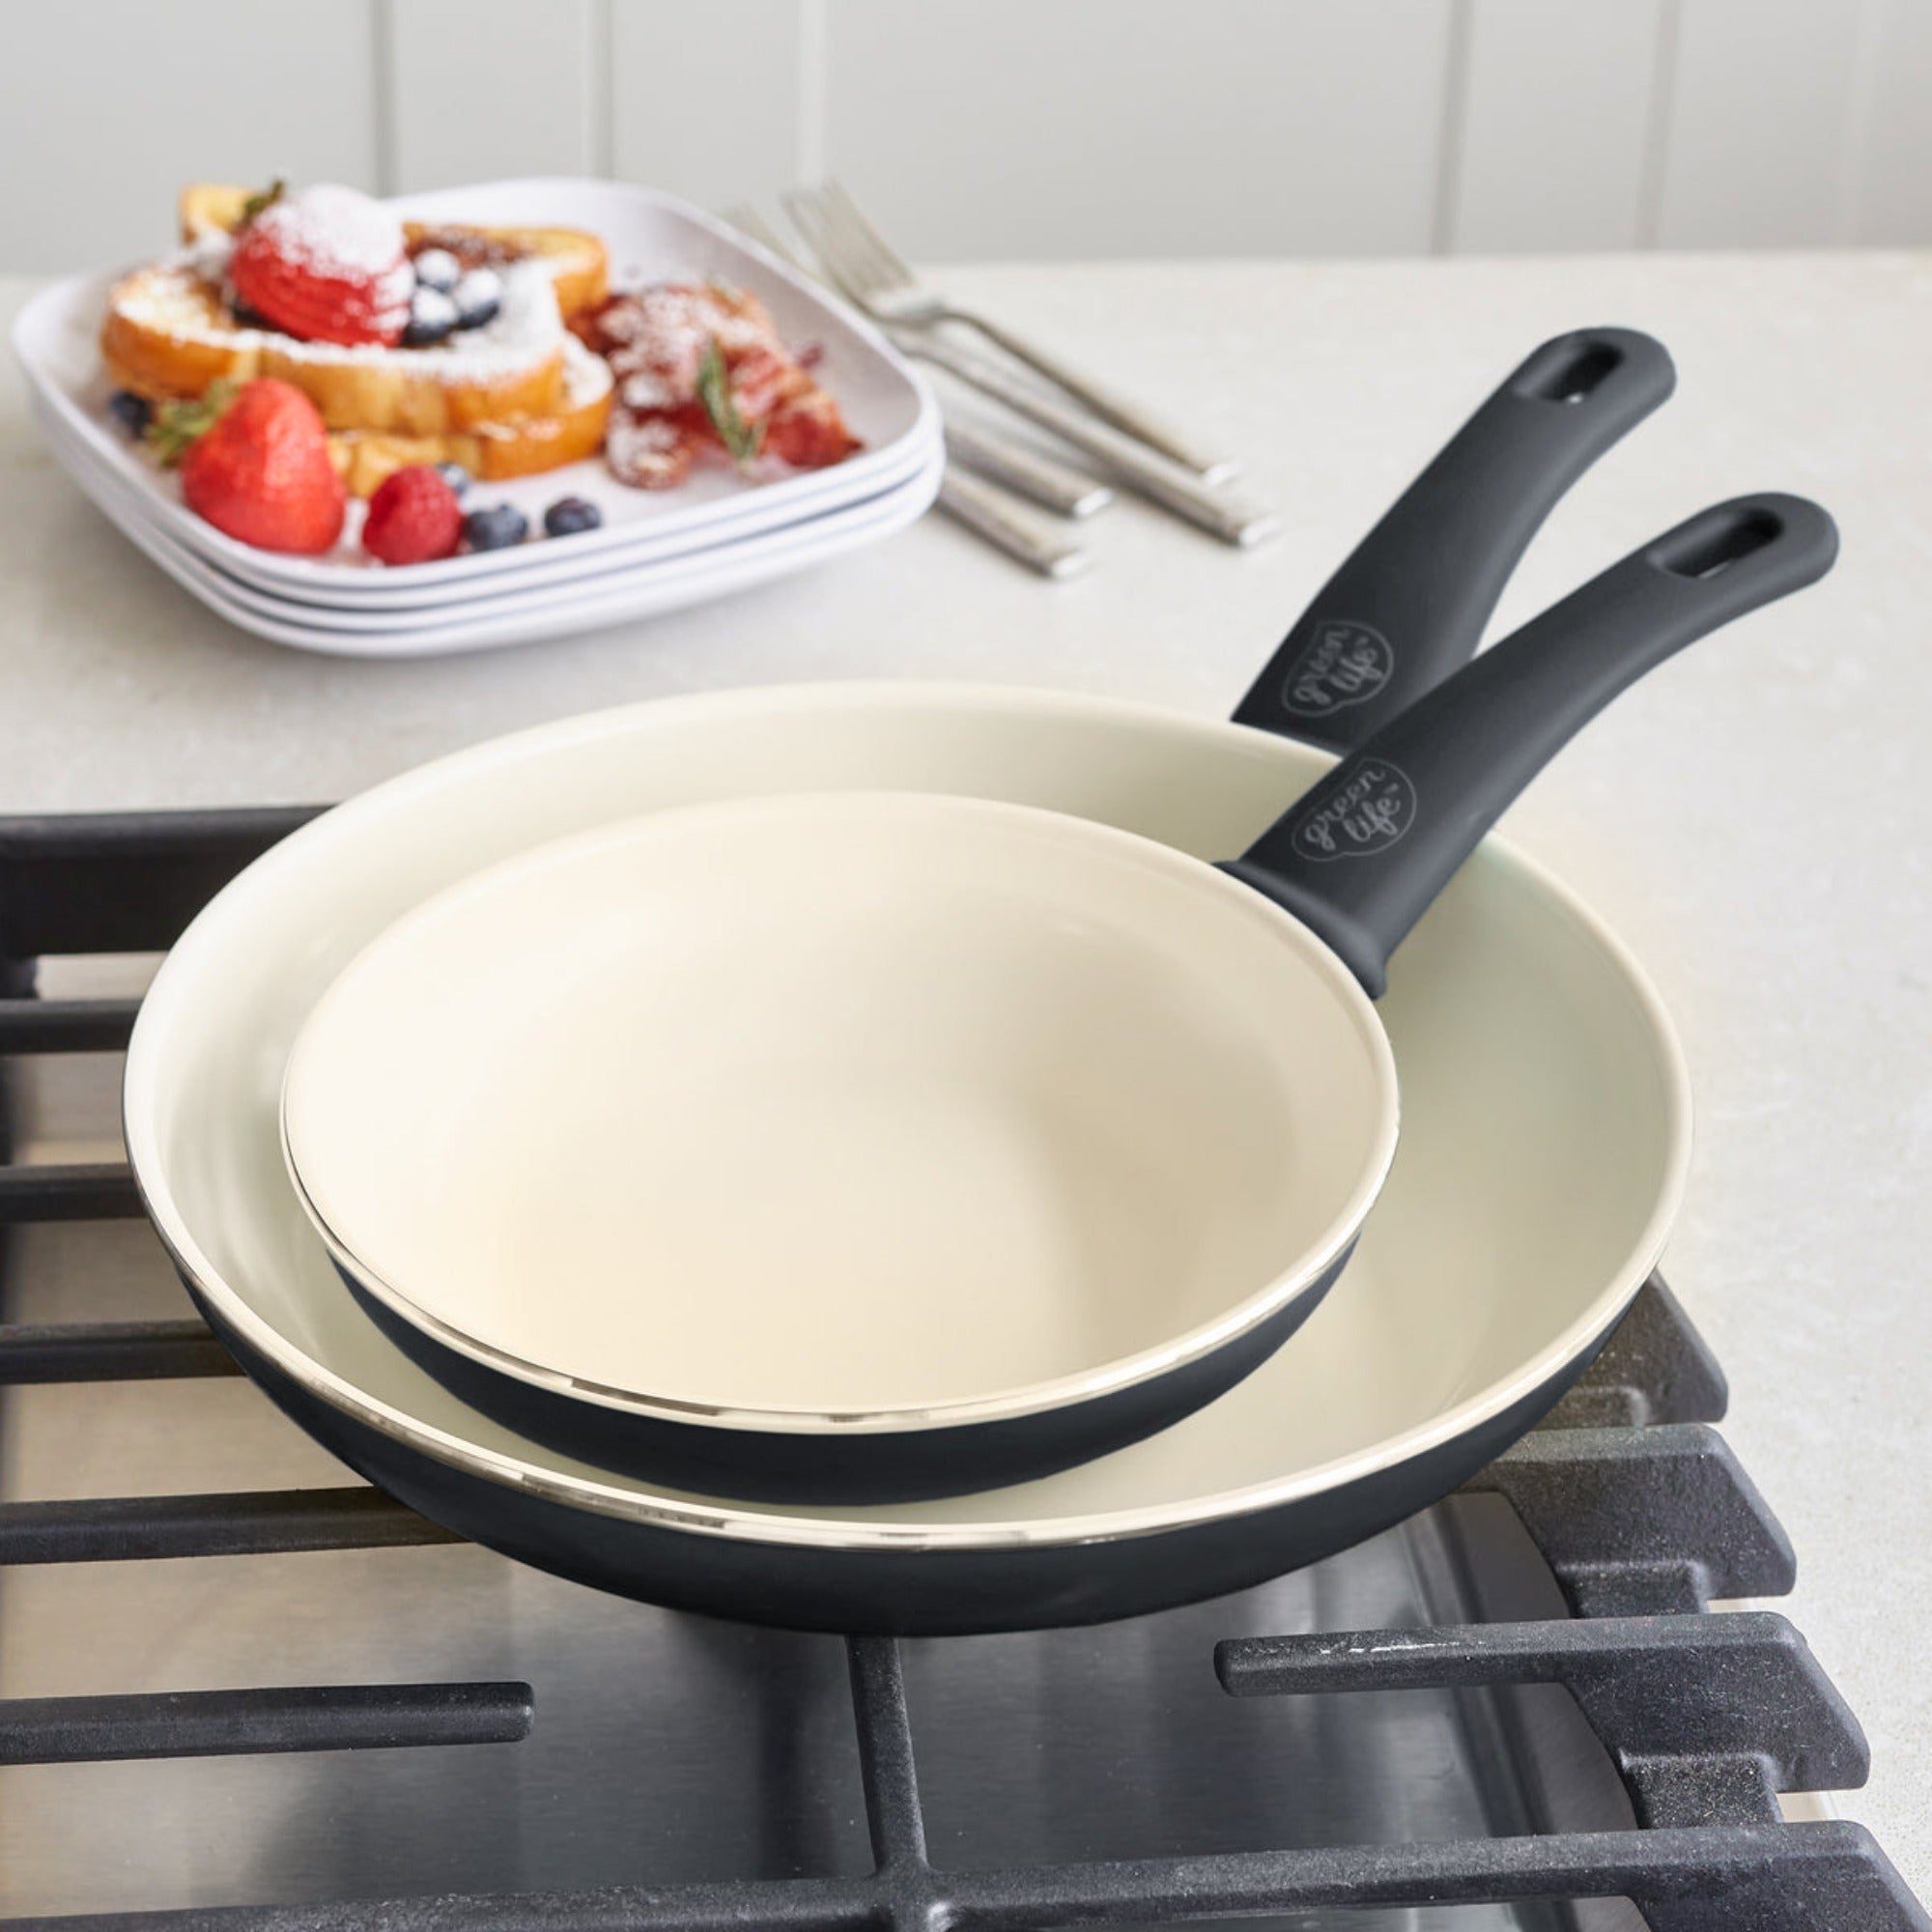 GreenLife  Soft Grip 7 and 10-Inch Frypan Set